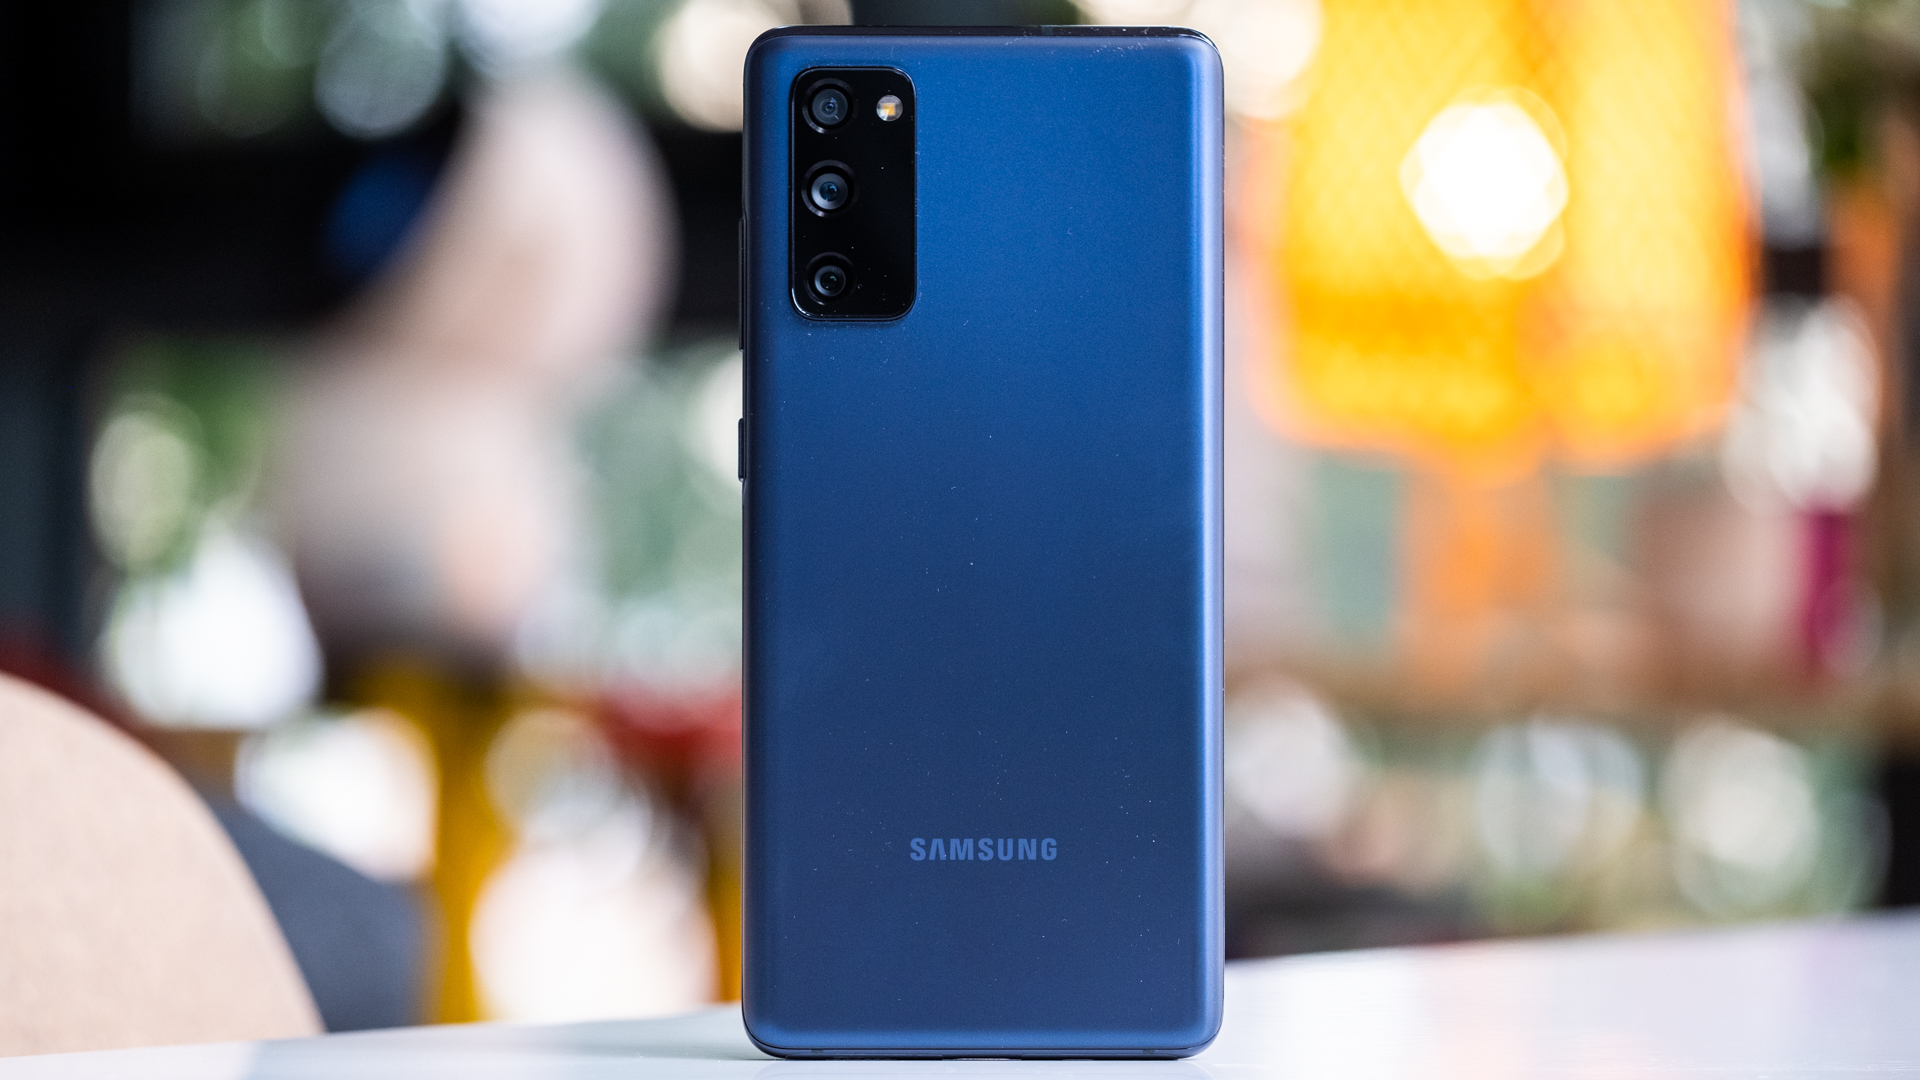 Samsung Galaxy S20 FE buyer's guide: Everything you need to know